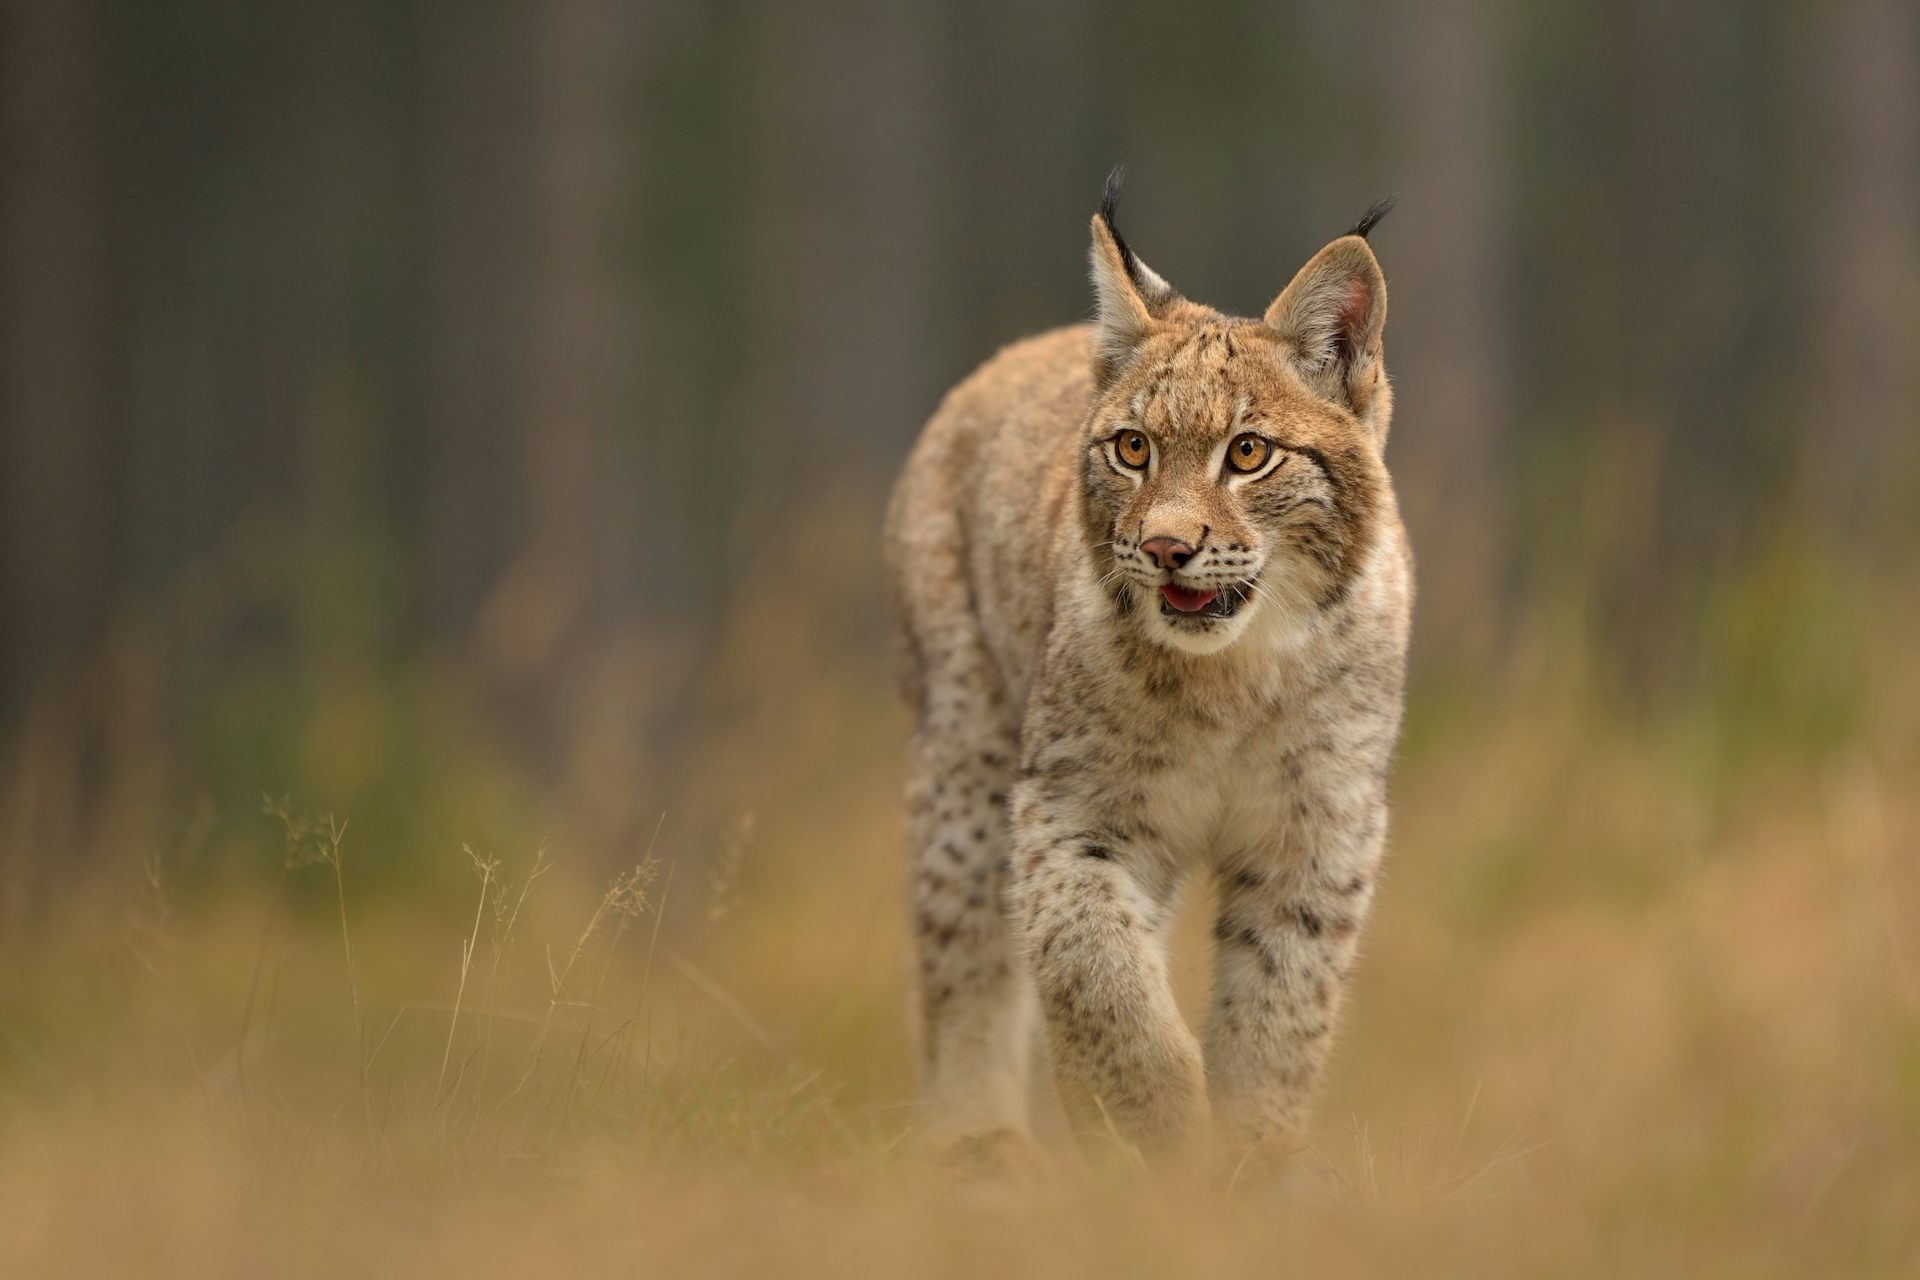 The lynx may have survived in Scotland centuries later than previously  thought, new study suggests